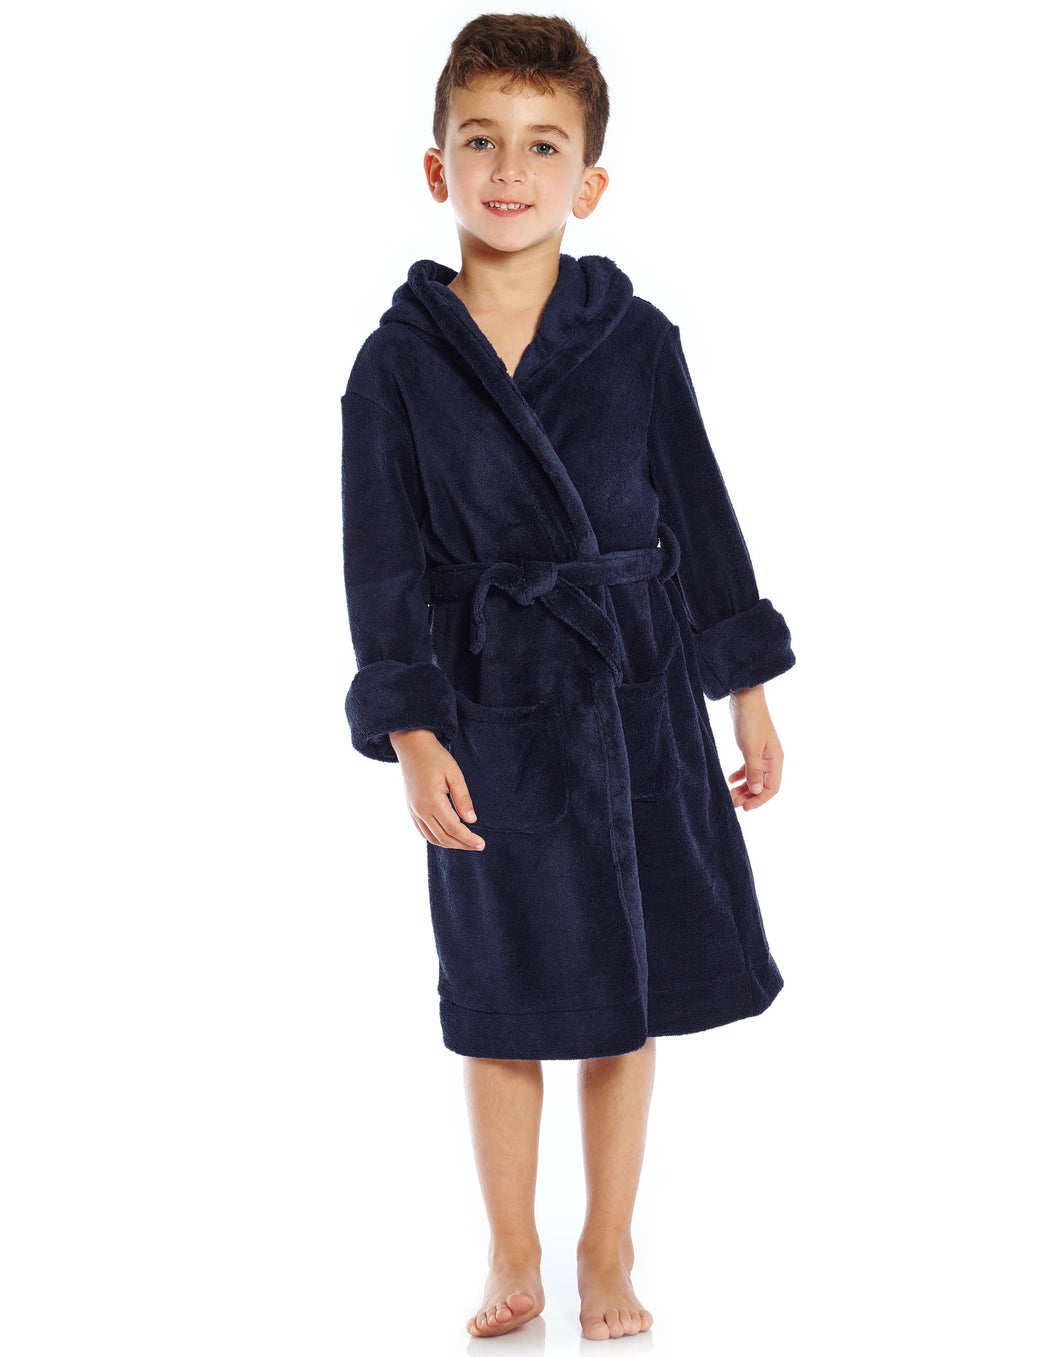 Leveret Pajamas - Kids Fleece Hooded Robe Solid Color: NAVY / 10 Year